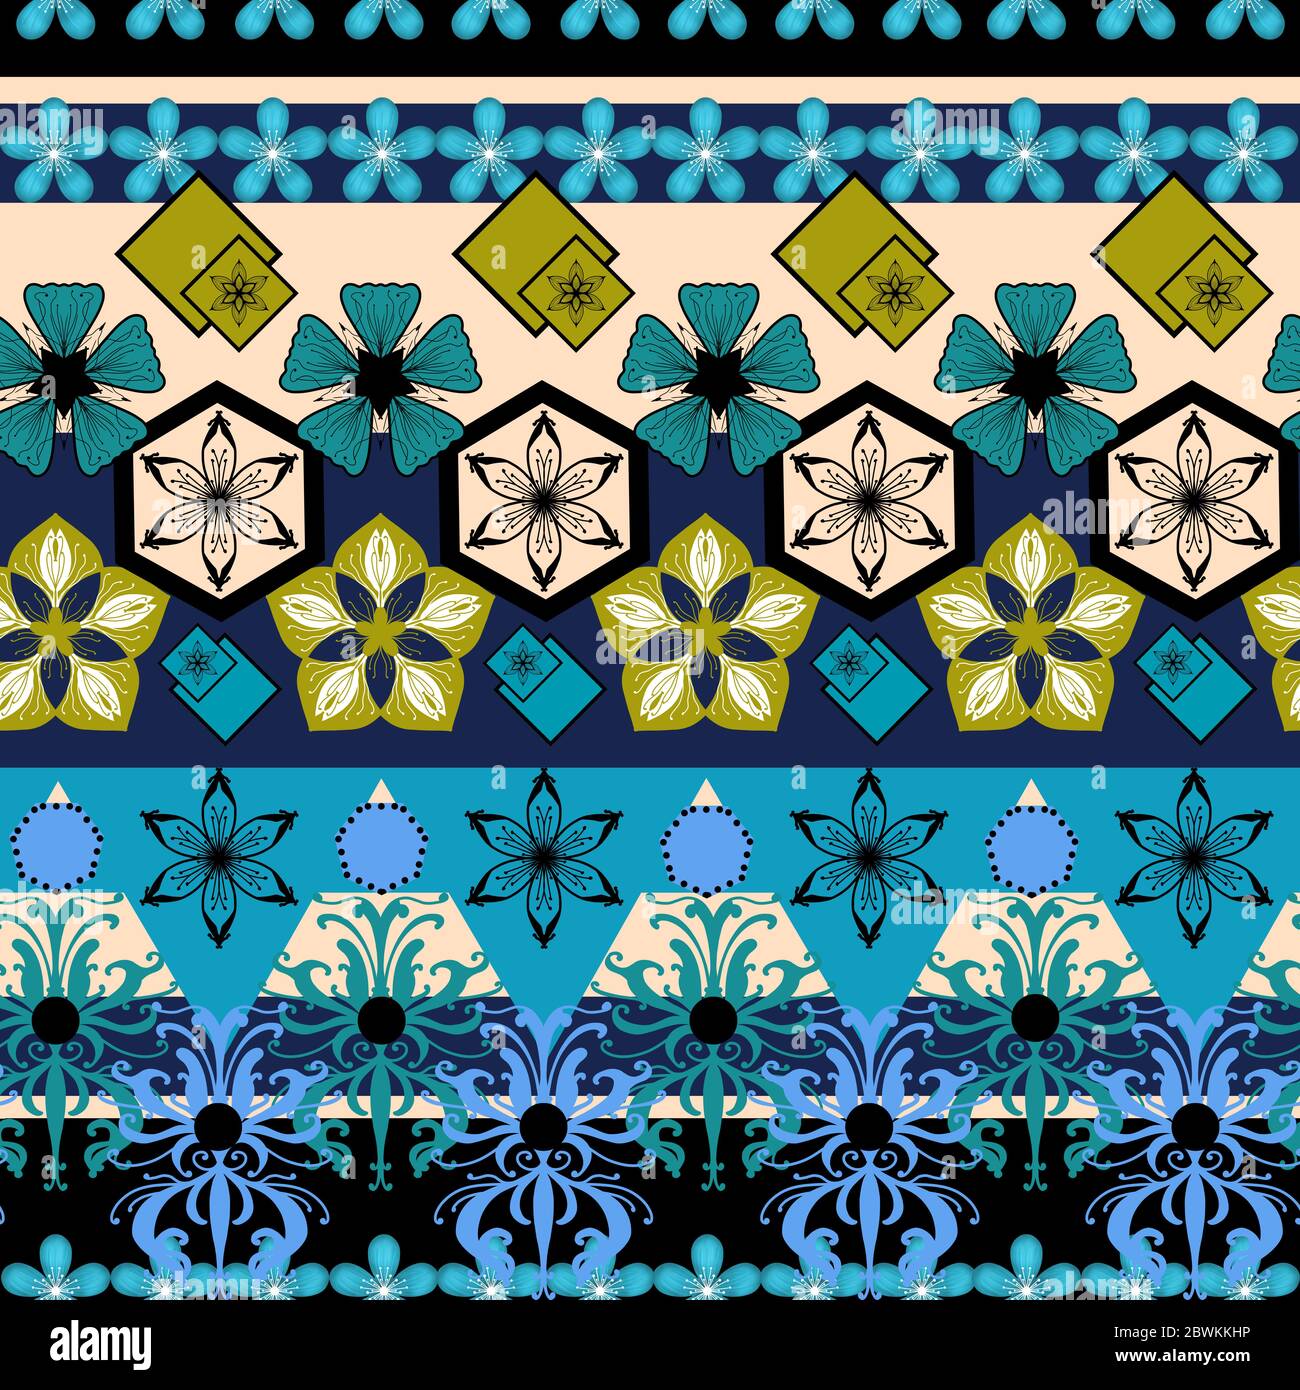 Bright saturated pattern with shapes and flowers in blue, beige and golden colors. Seanless pattern. Stock Photo